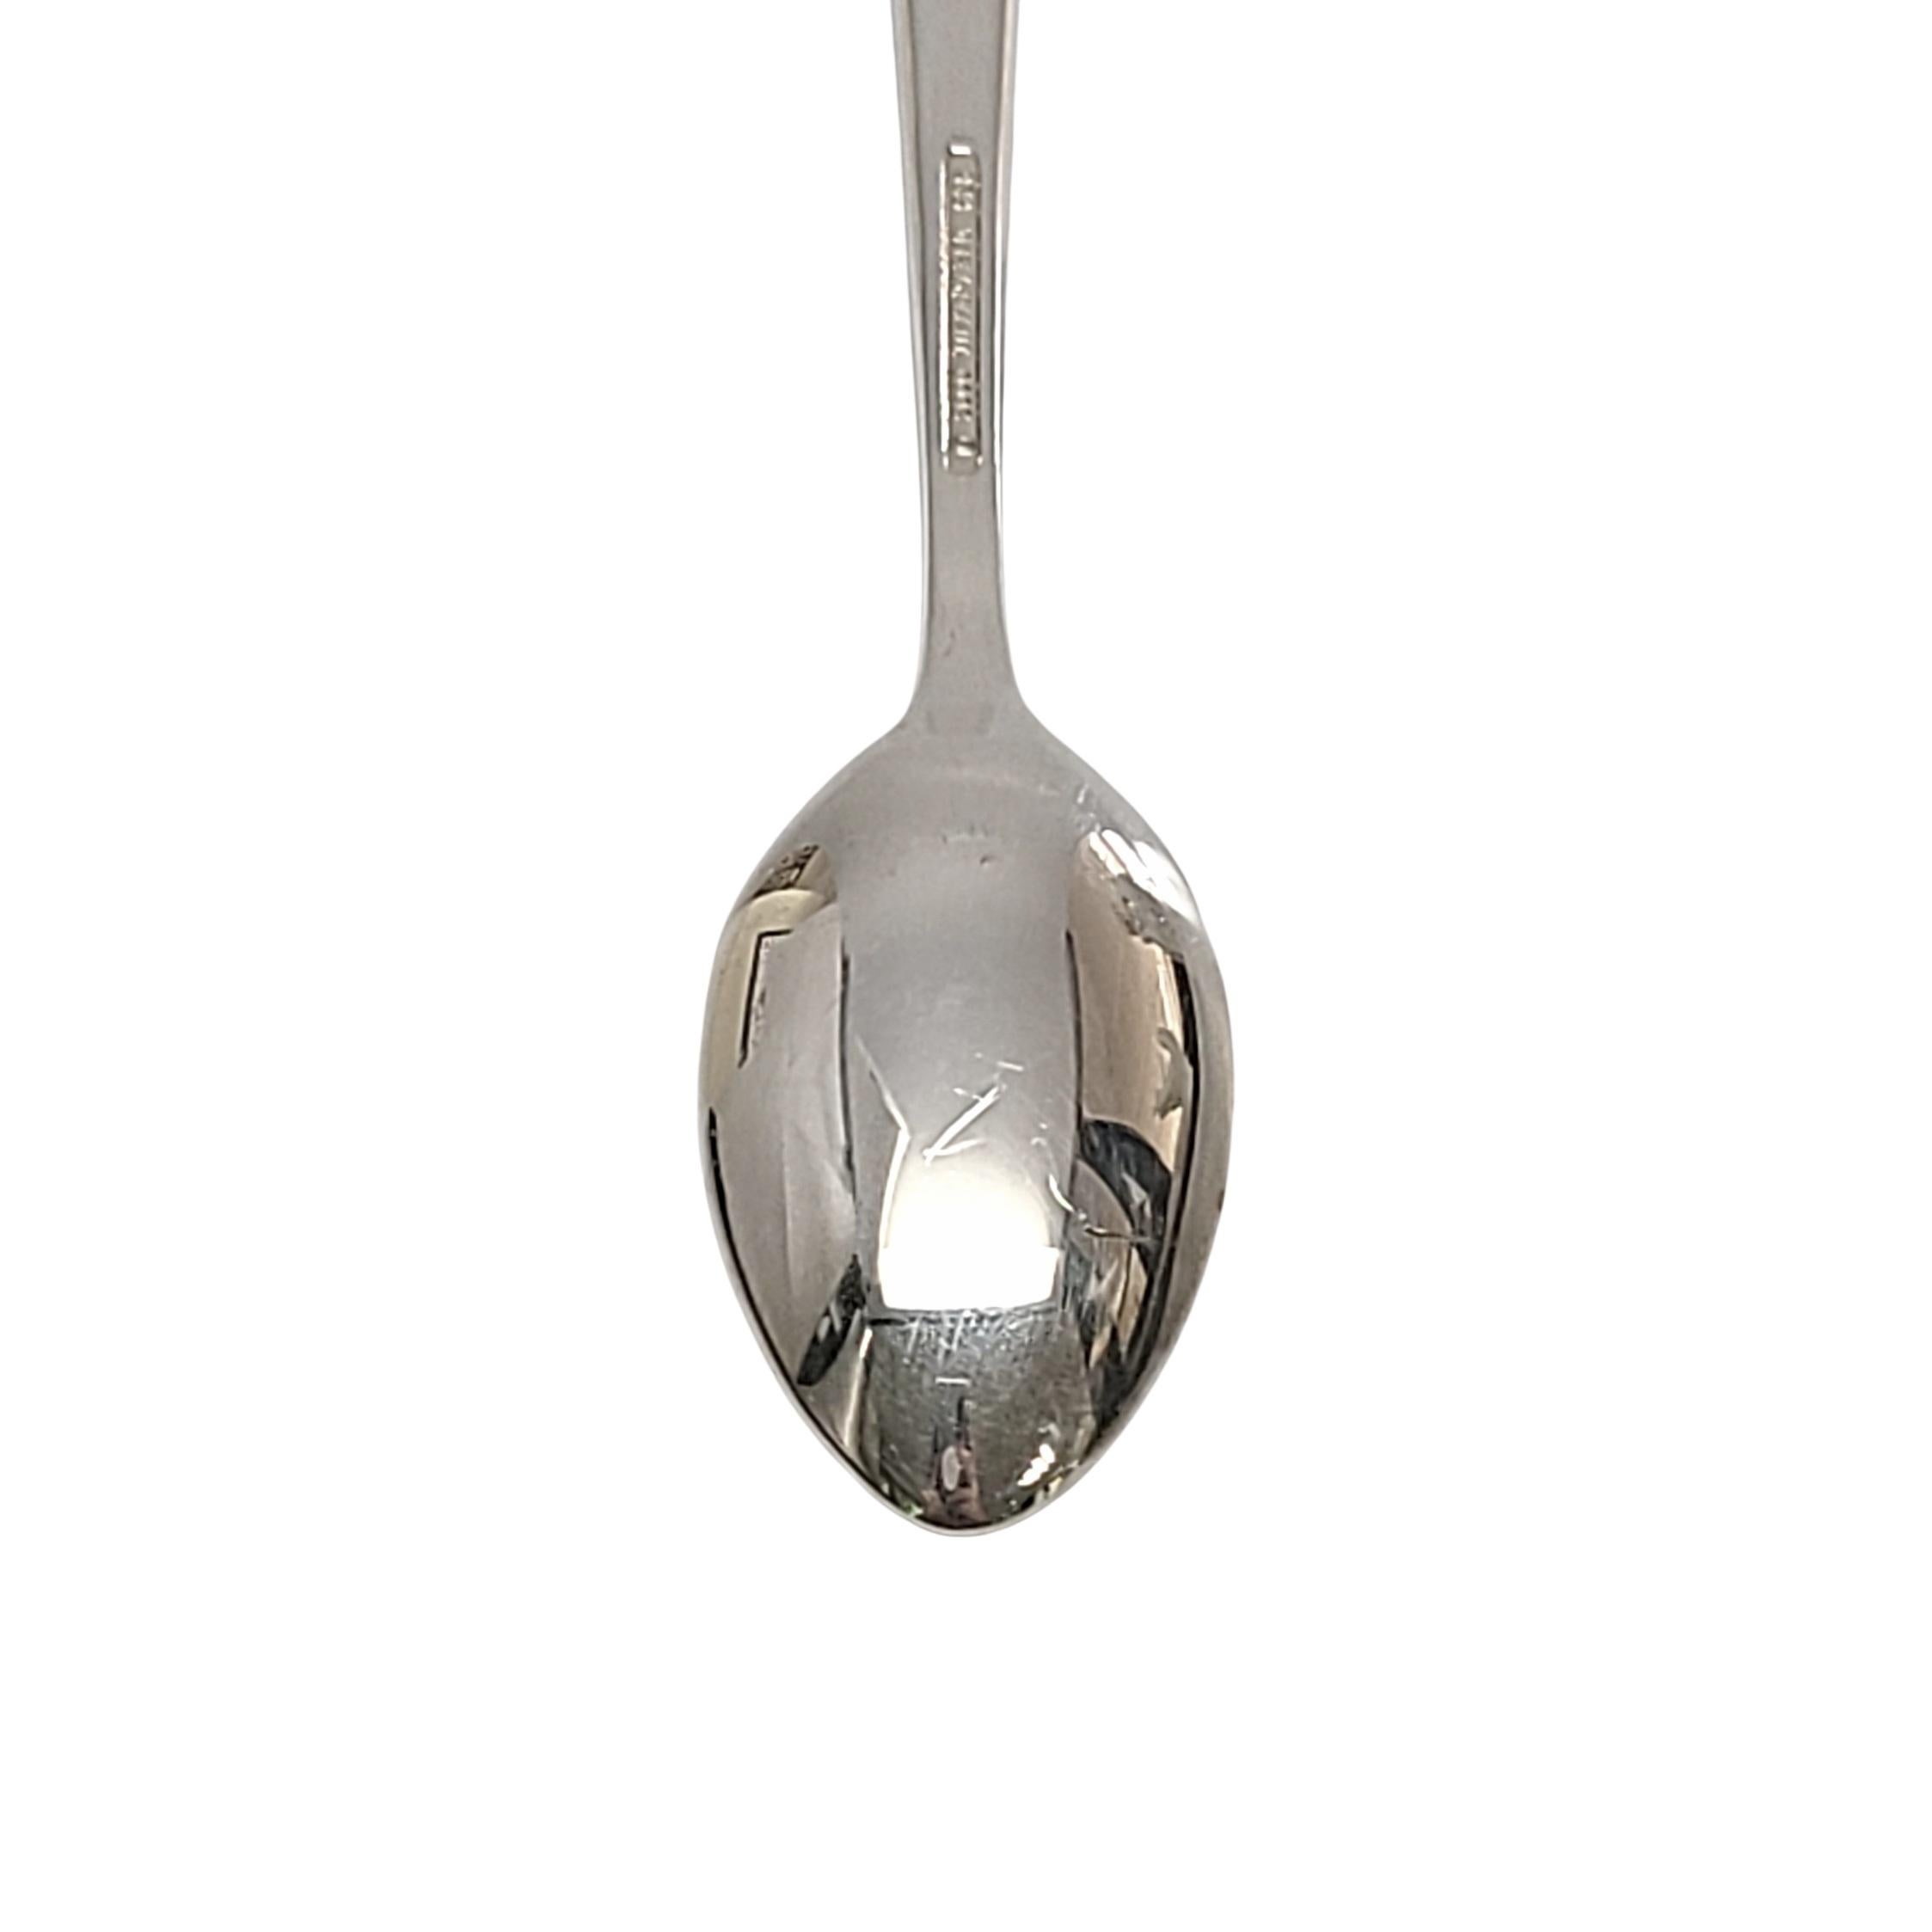 Tiffany & Co Sterling Silver Man in the Moon Baby Feeding Spoon with Pouch 1